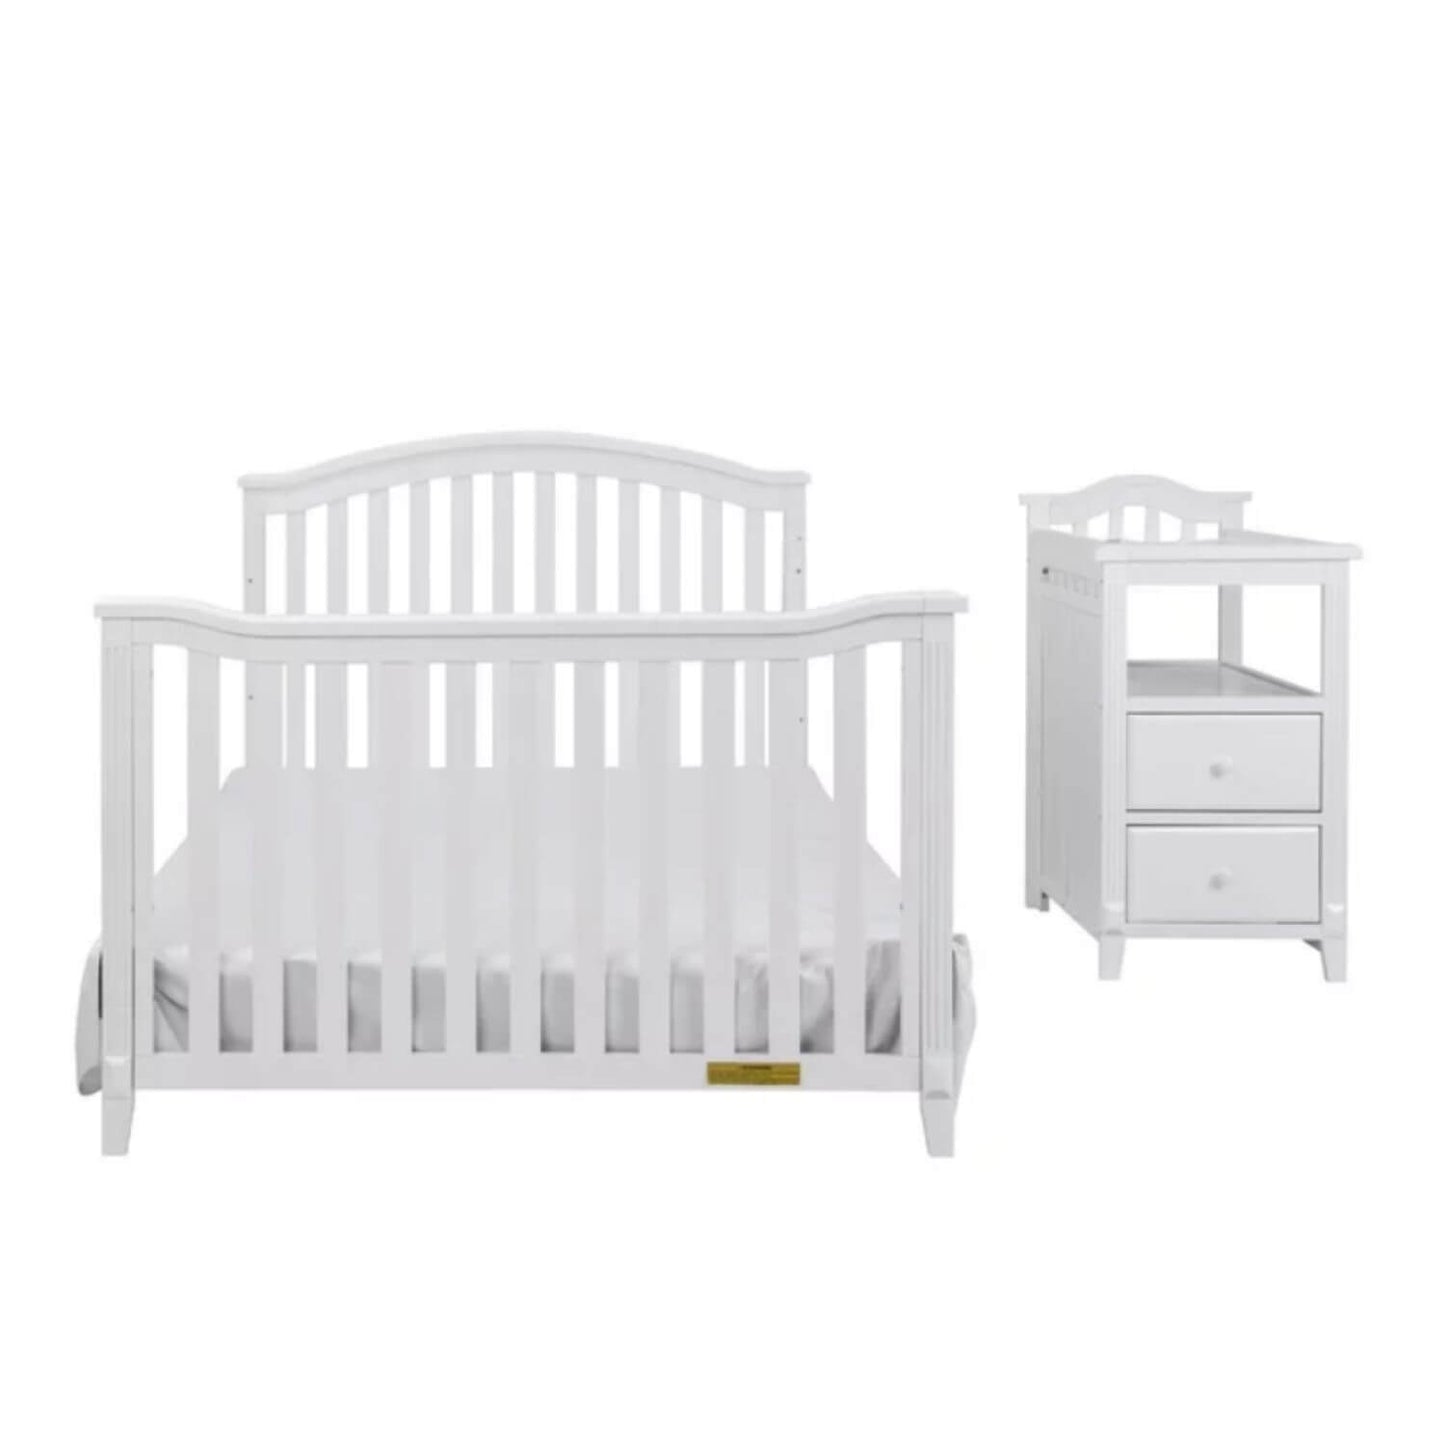 AFG Kali 4-in-1 Crib and Changer Combo White